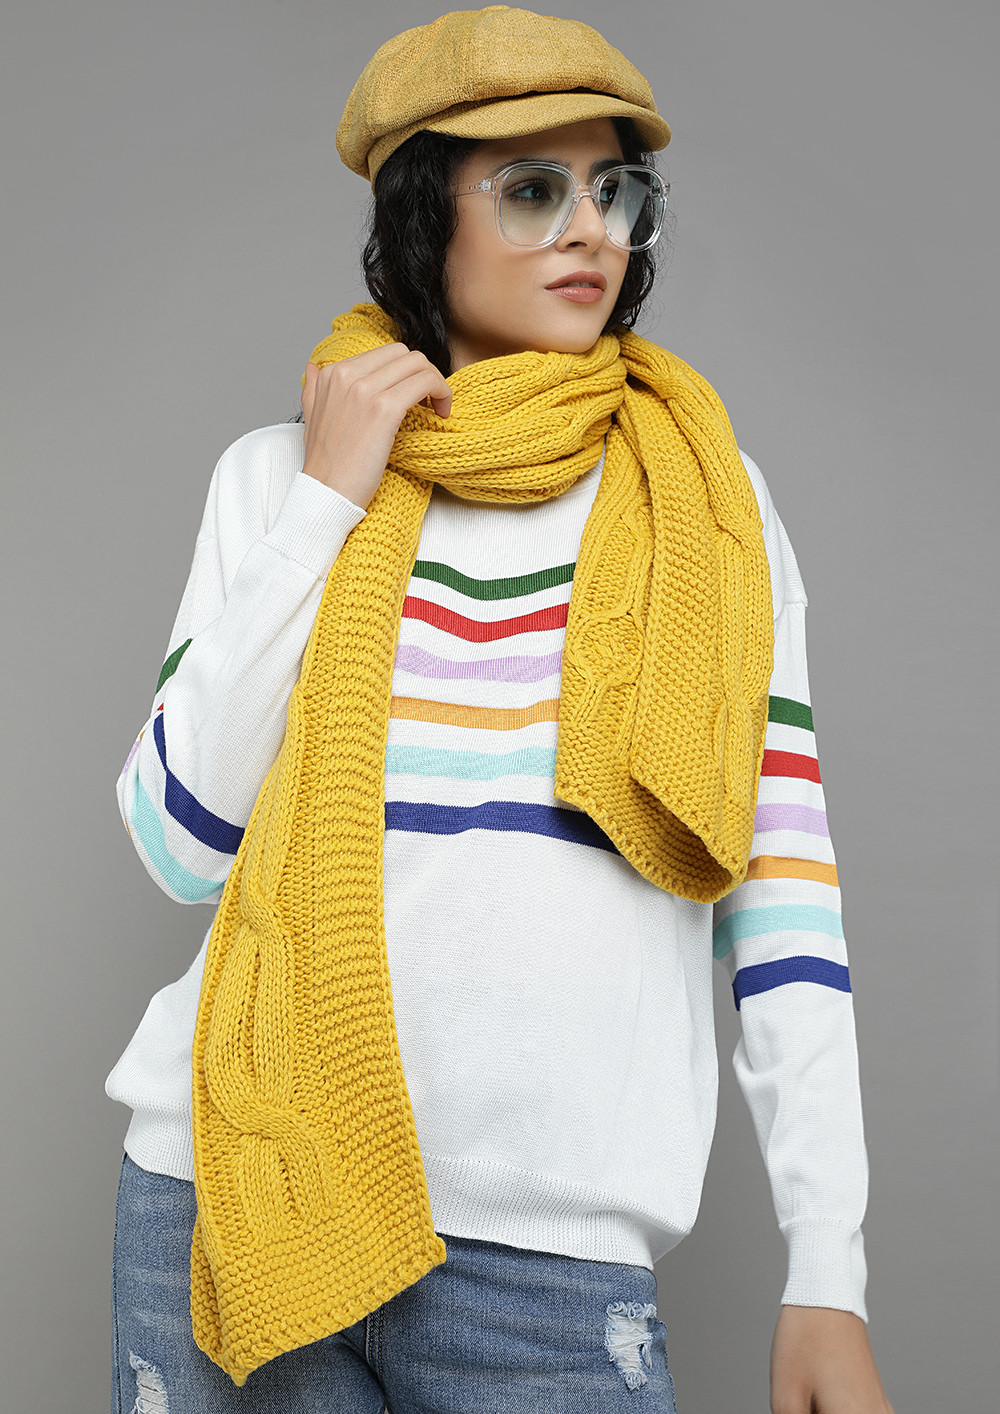 HABIT IS A CABLE YELLOW KNITTED SCARF 